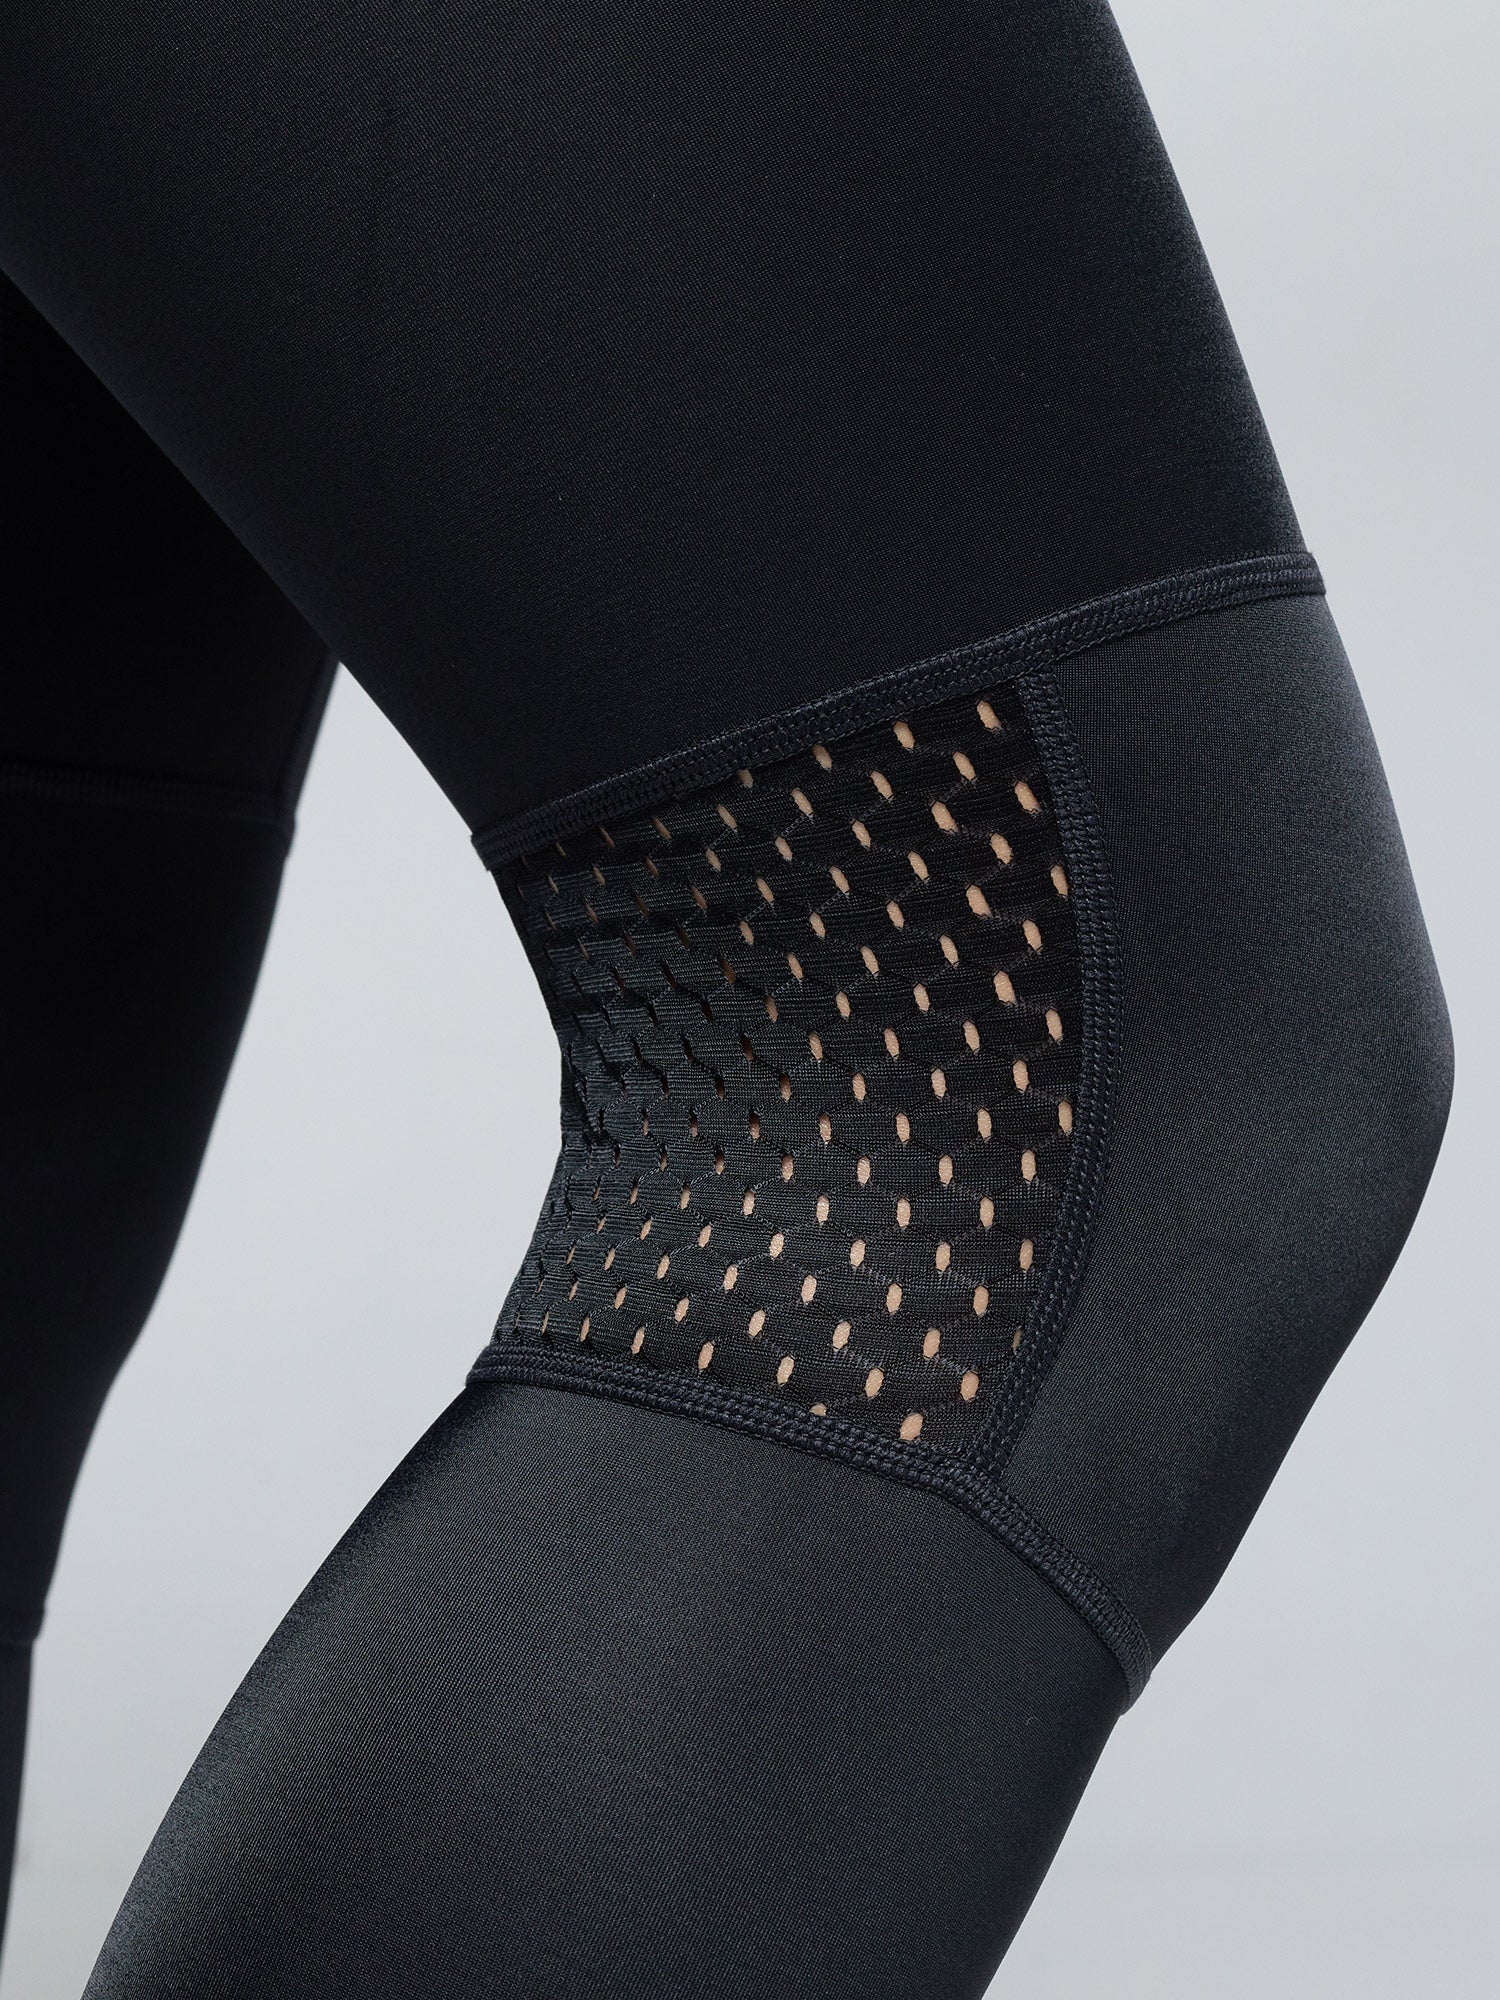 SCOTT Gravel Tights Without Padding Black for Women - Bikable